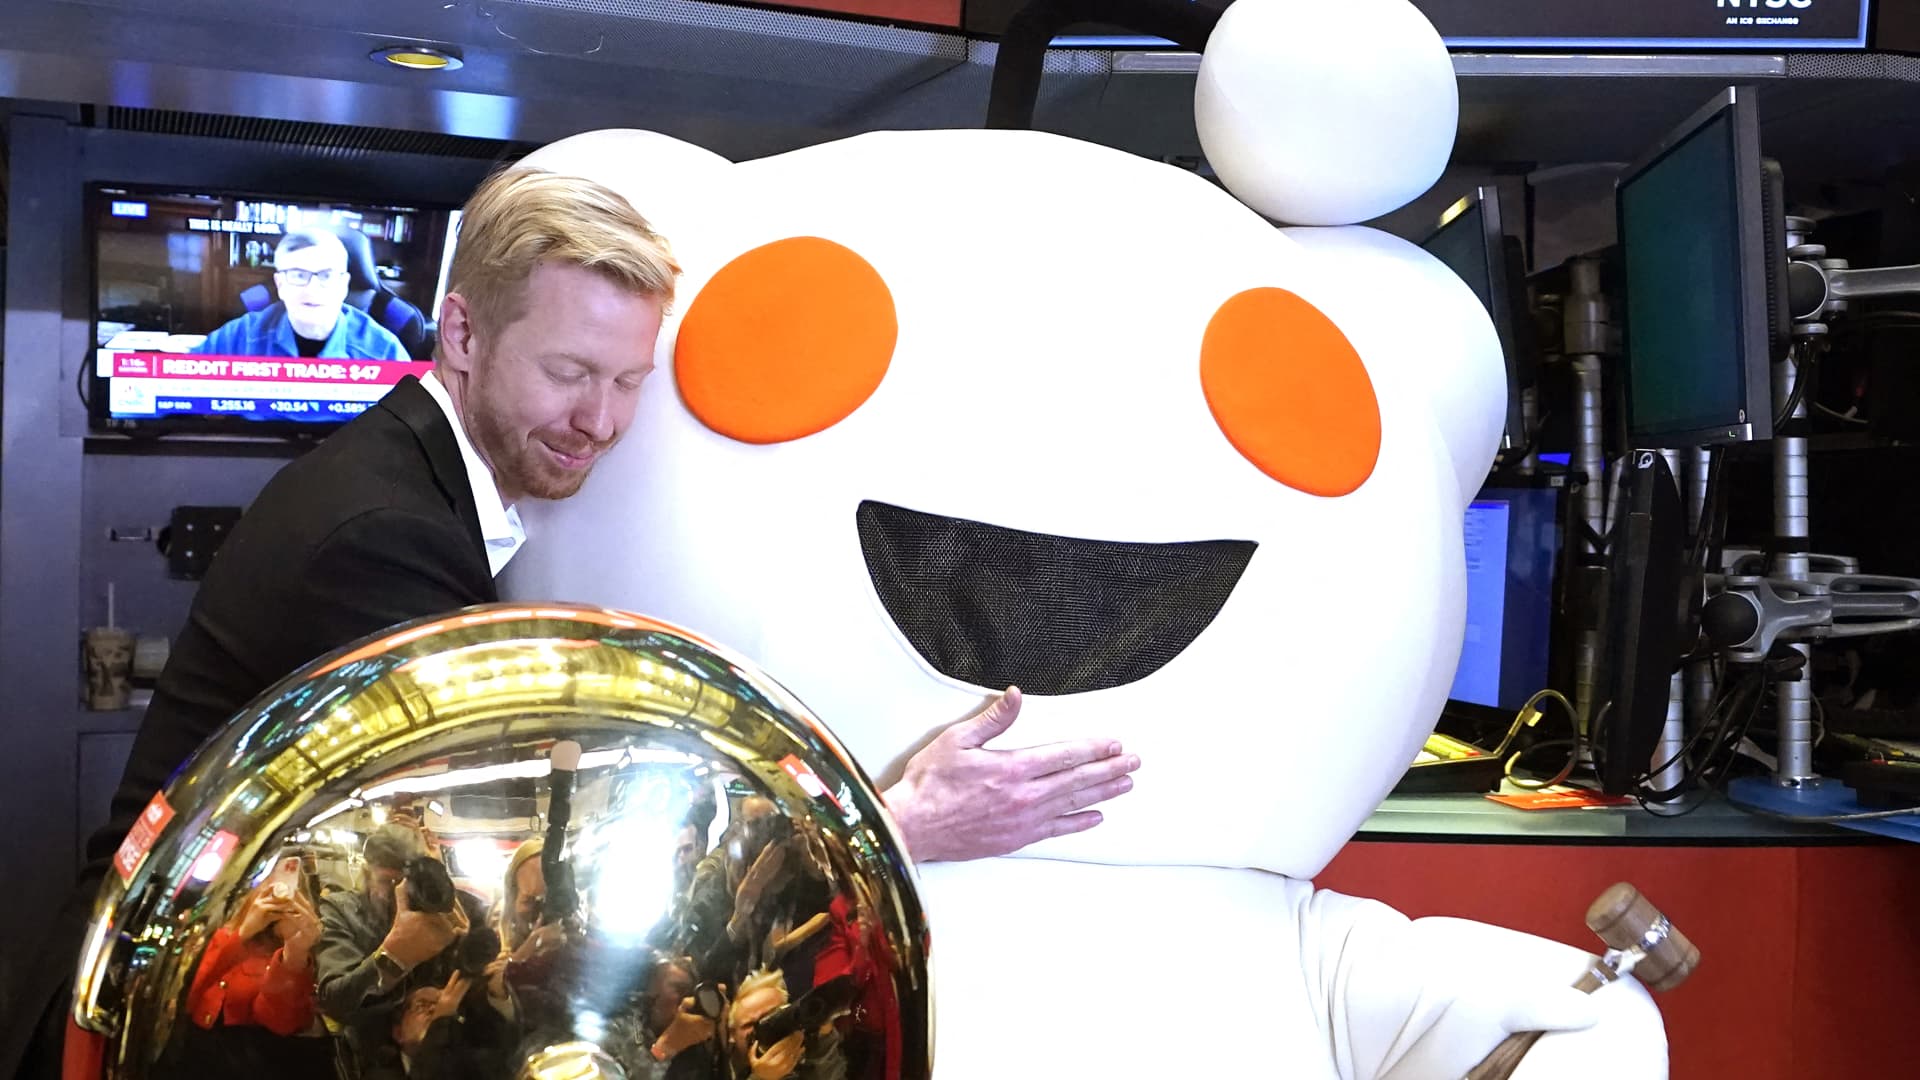 Reddit shares rise 30% to start week after social media company's IPO